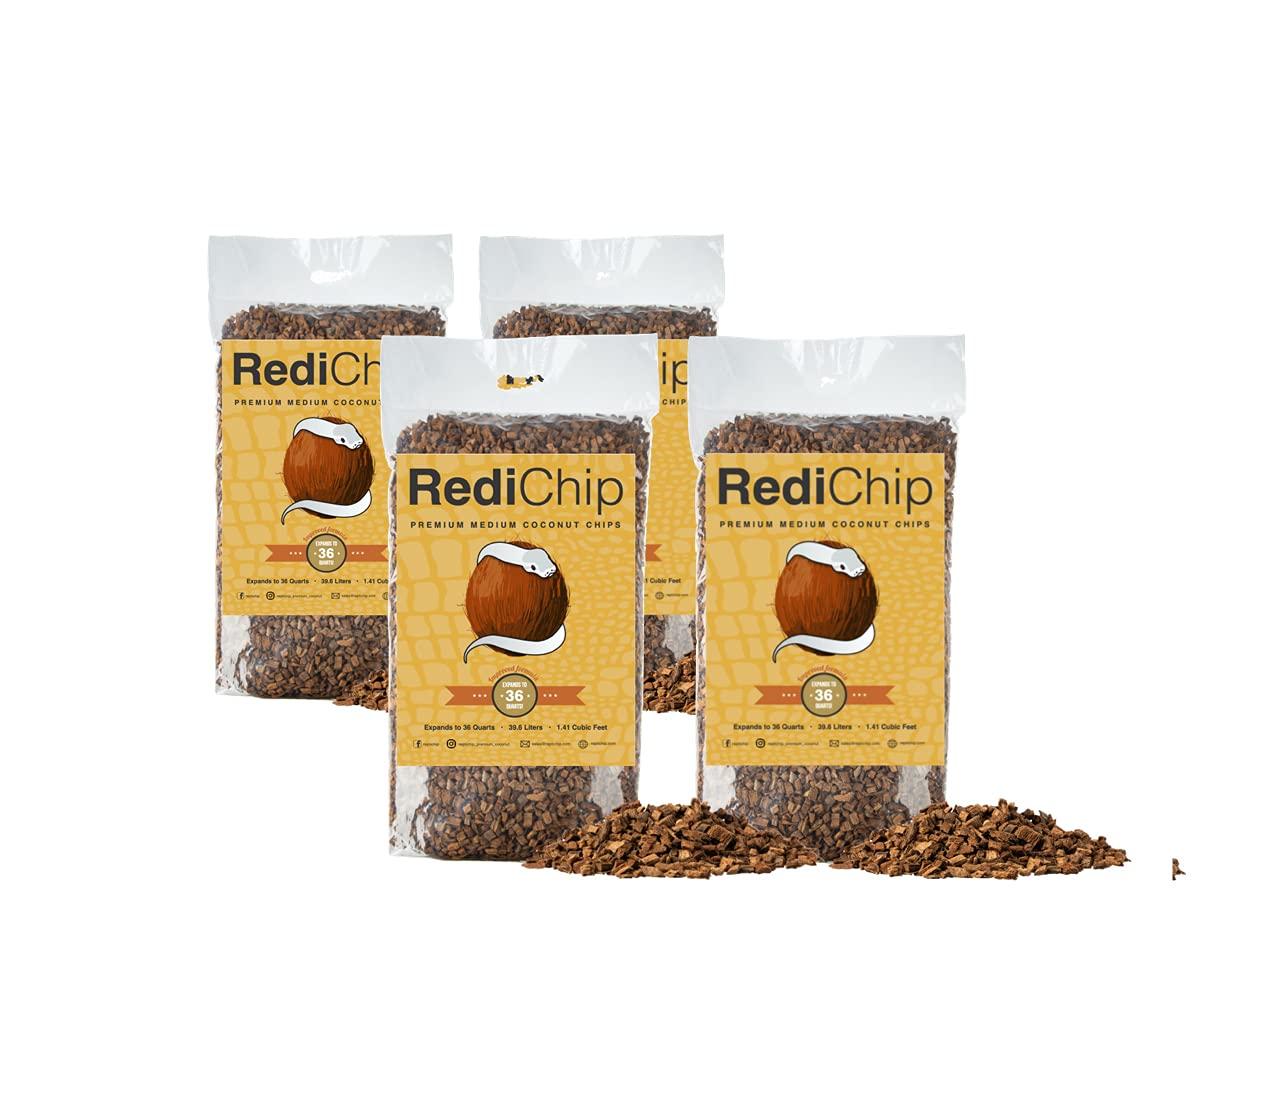 RediChip Coconut Chip Substrate for Reptiles 36 Quart Loose Medium Sized Coconut Husk Chip Reptile Bedding (4 Pack)